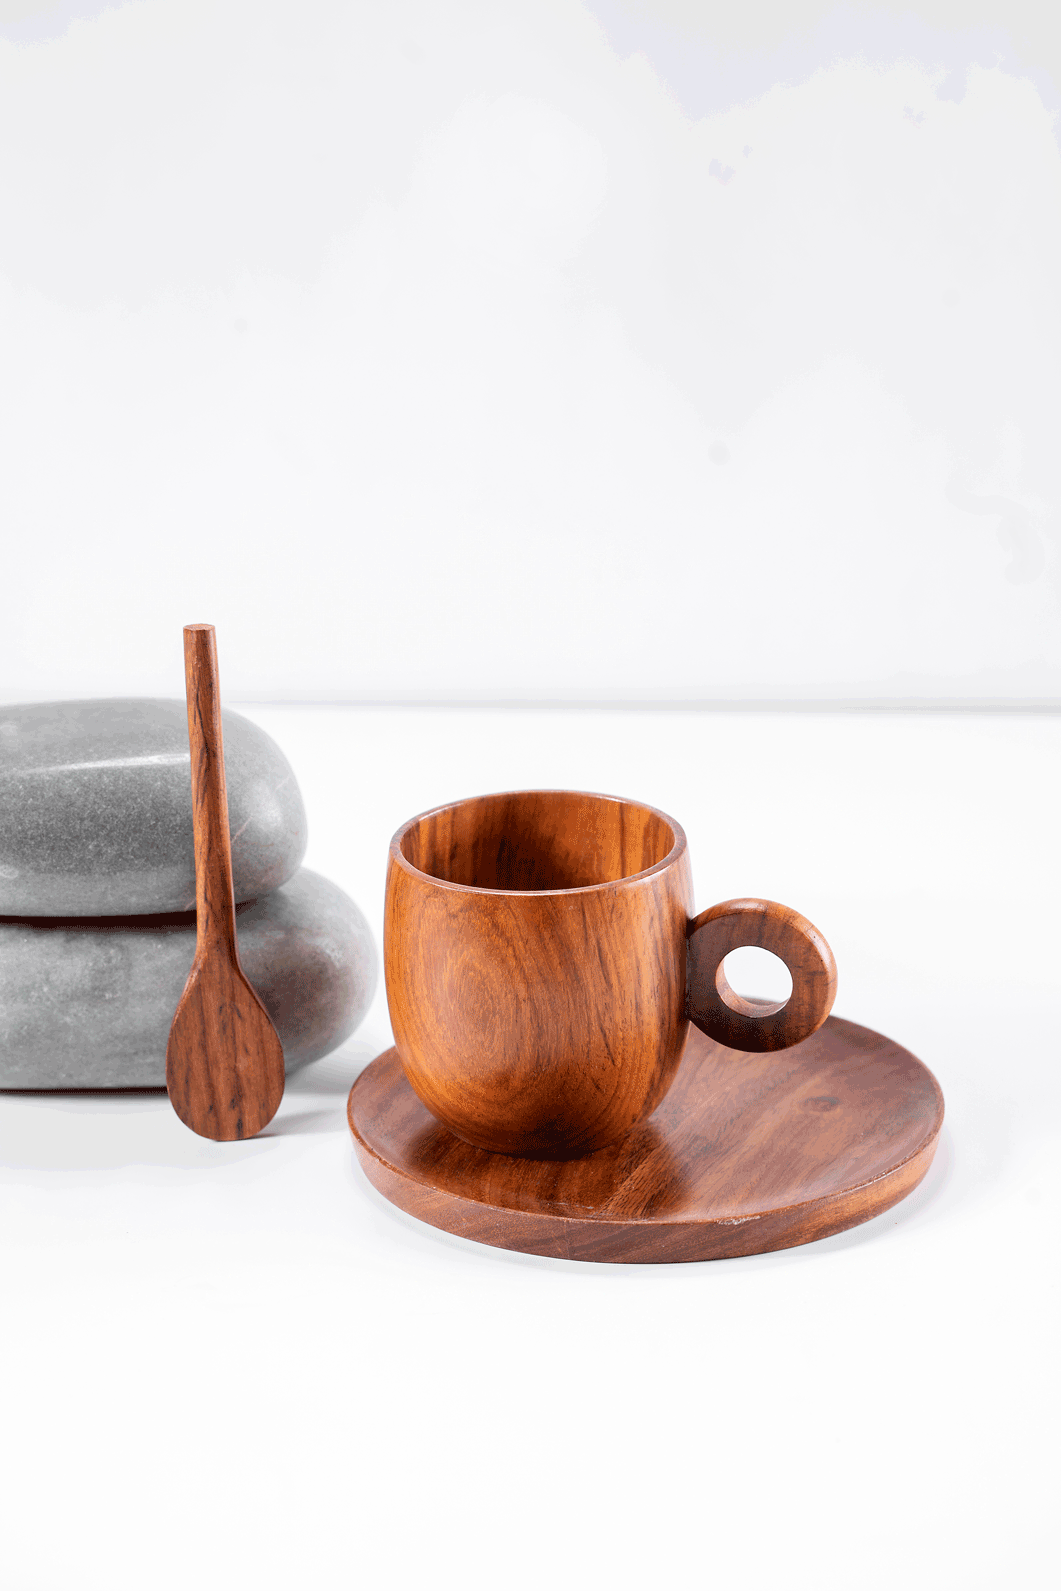 Shikora - Wooden cup saucer and spoon set, a product by Araana Homes